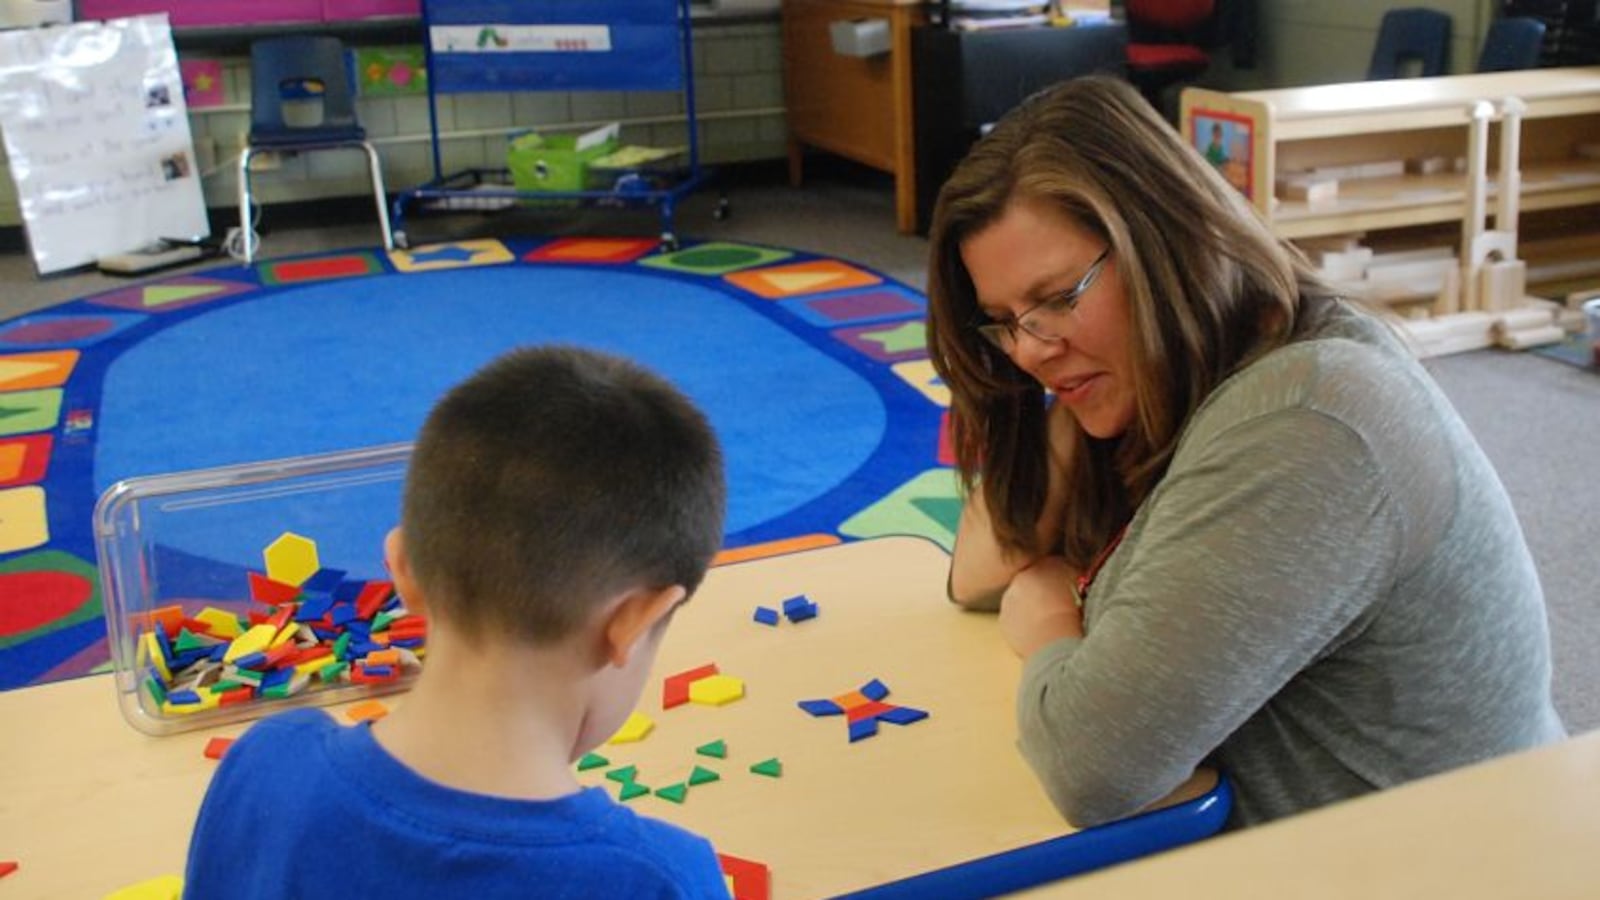 Brandy Barhite works with a preschool student at Beach Court Elementary.